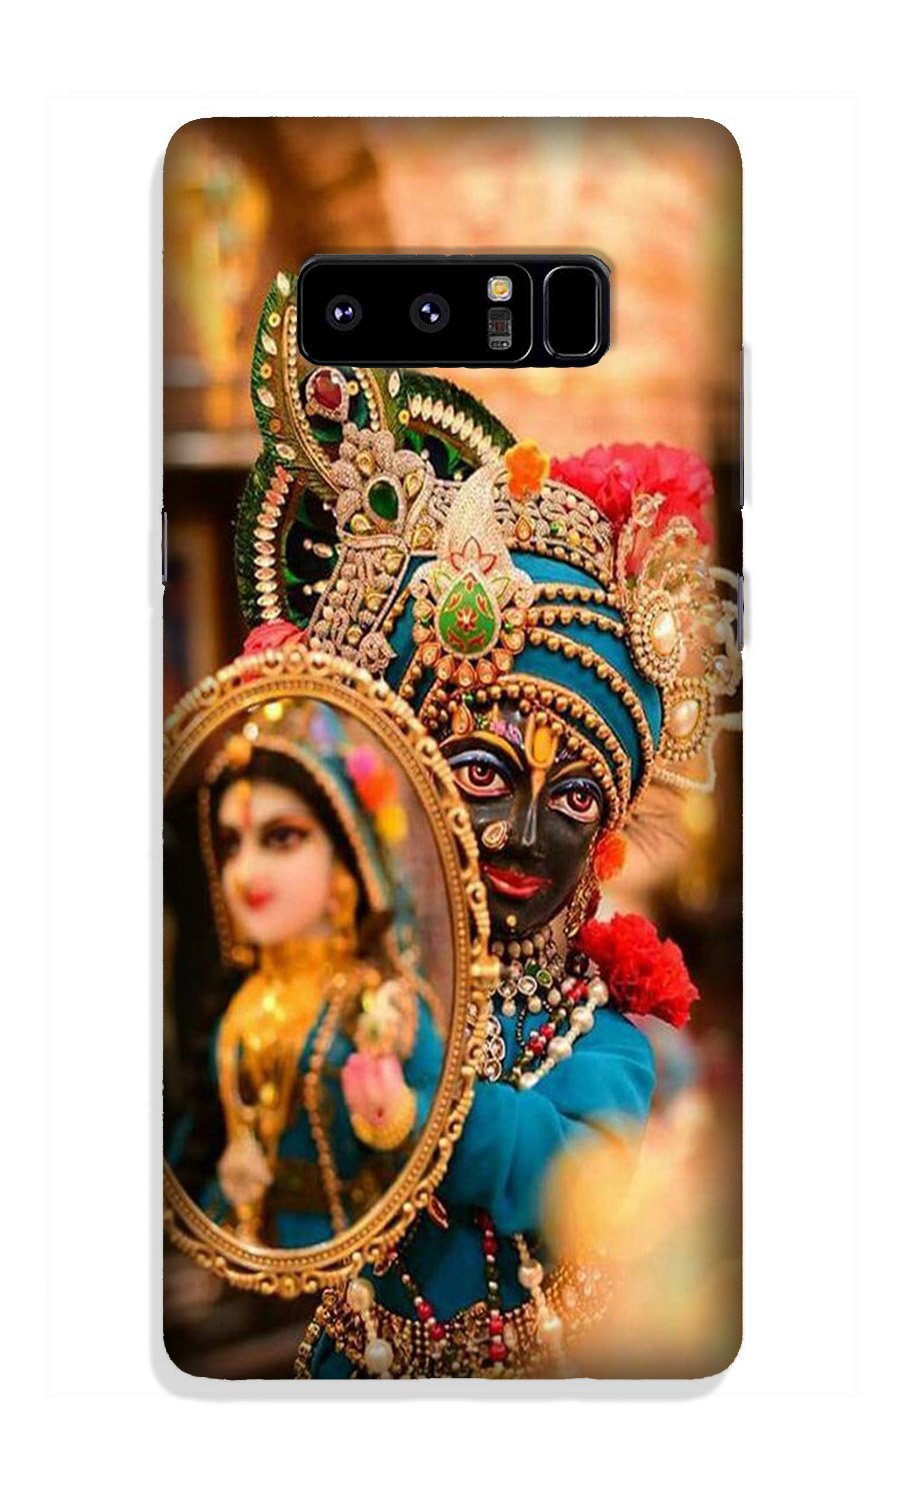 Lord Krishna5 Case for Galaxy Note 8